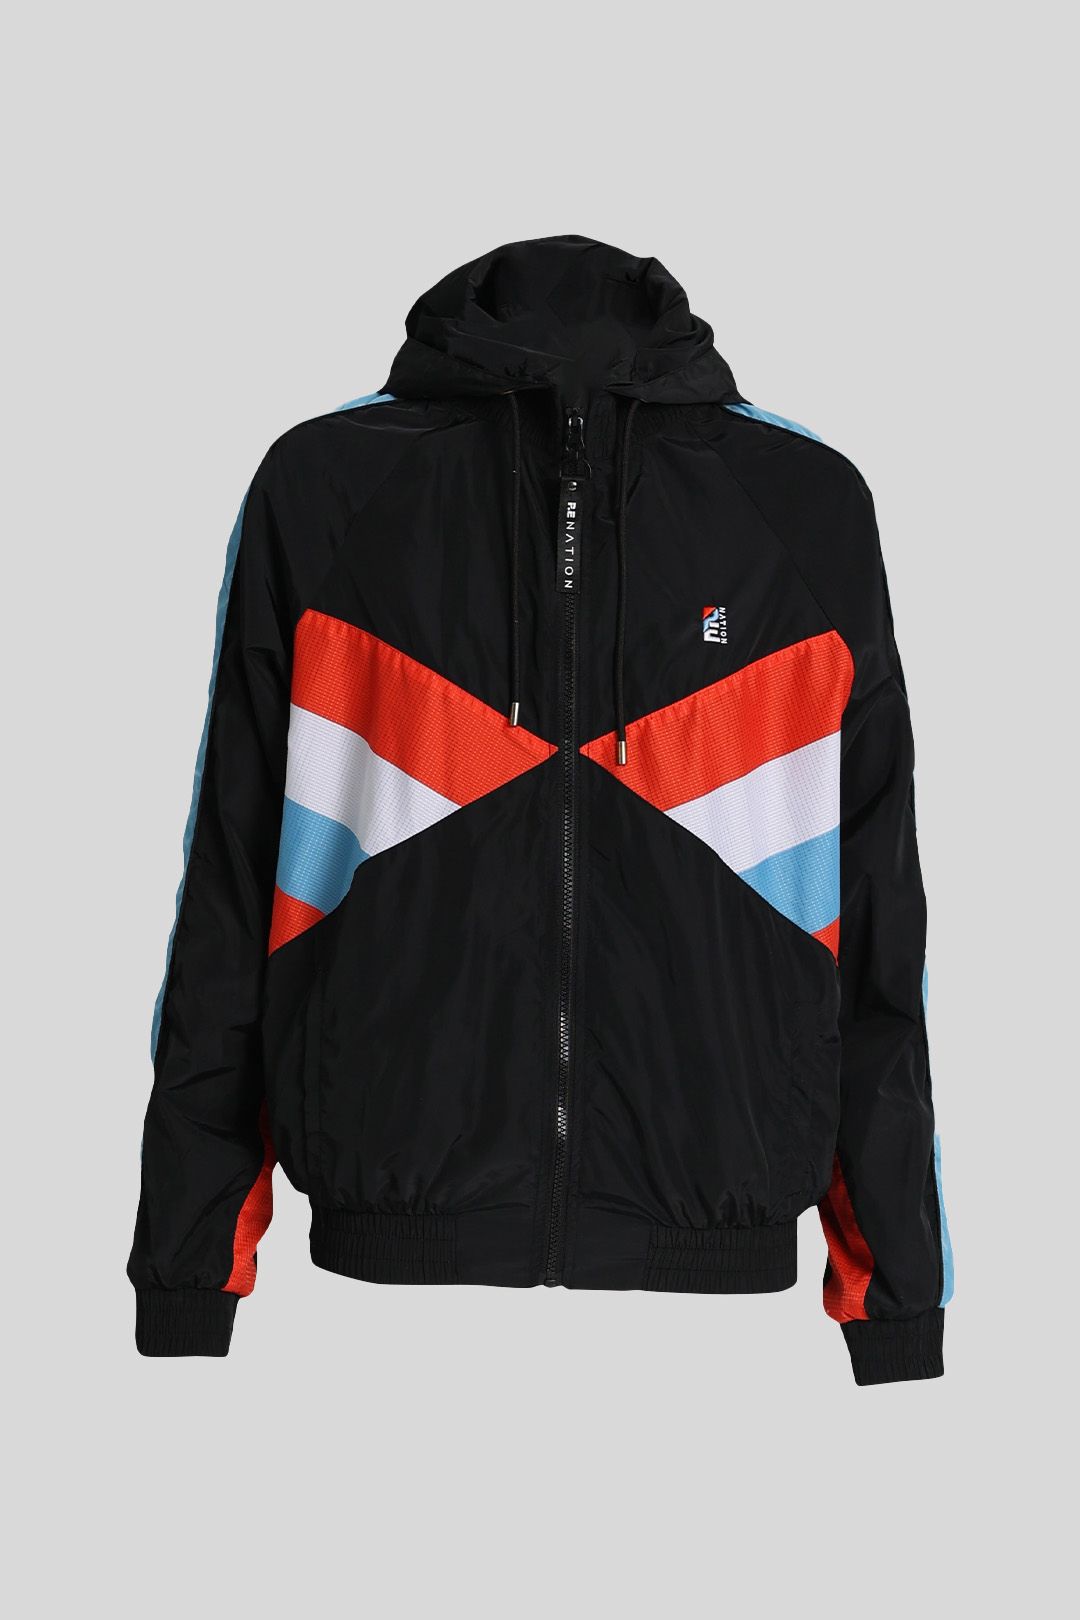 PE Nation Runners Jacket in Blue and Red Stripes